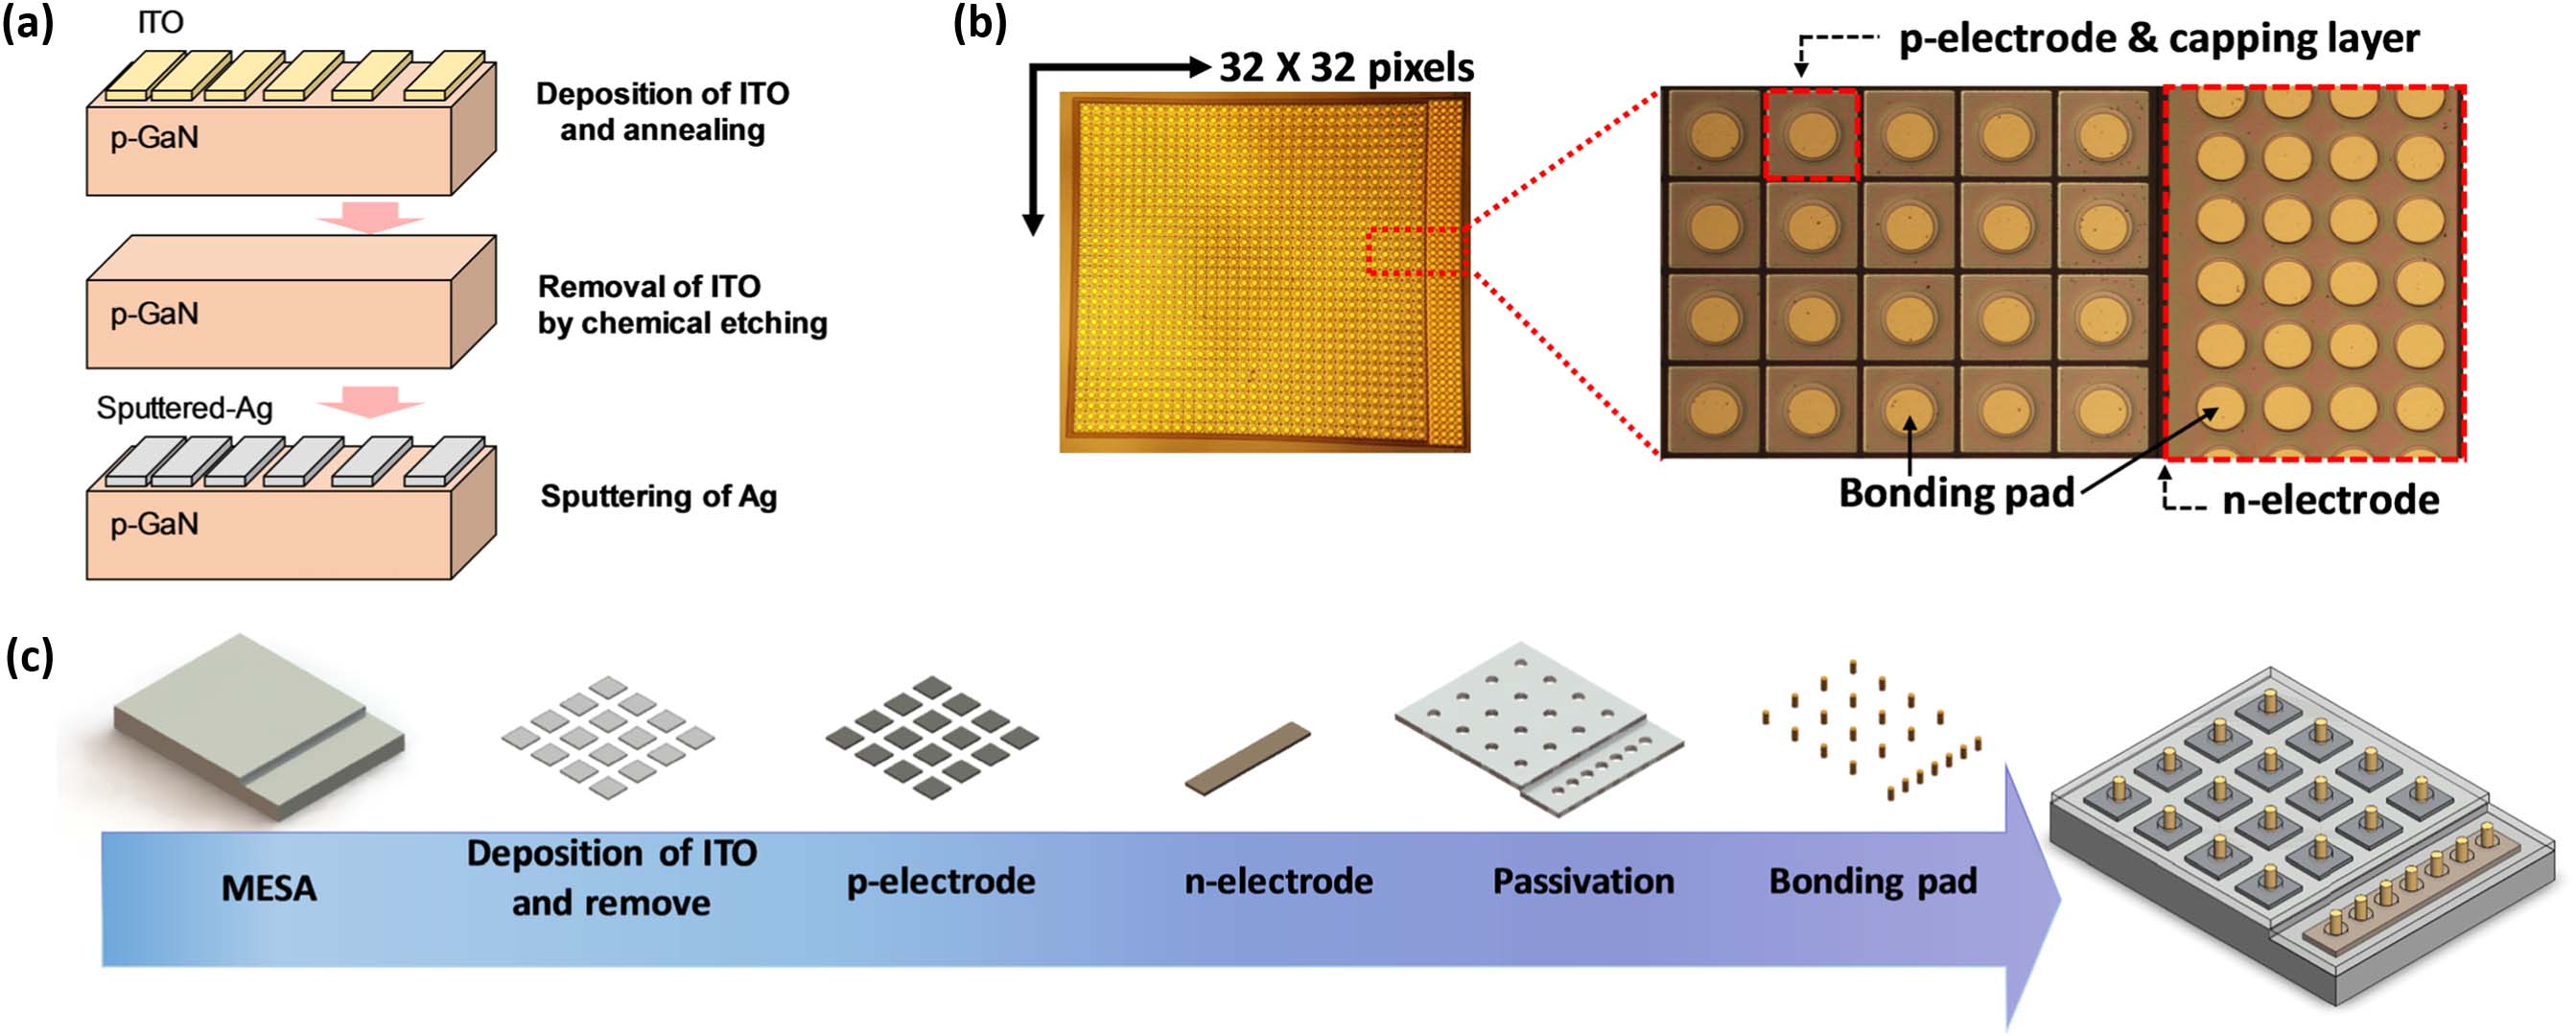 (a) Schematic diagram of ITO treatment for making L-TLM on a p-GaN surface. (b) Optical microscope image of μ-LED arrays. (c) Schematic fabrication steps of μ-LED arrays.